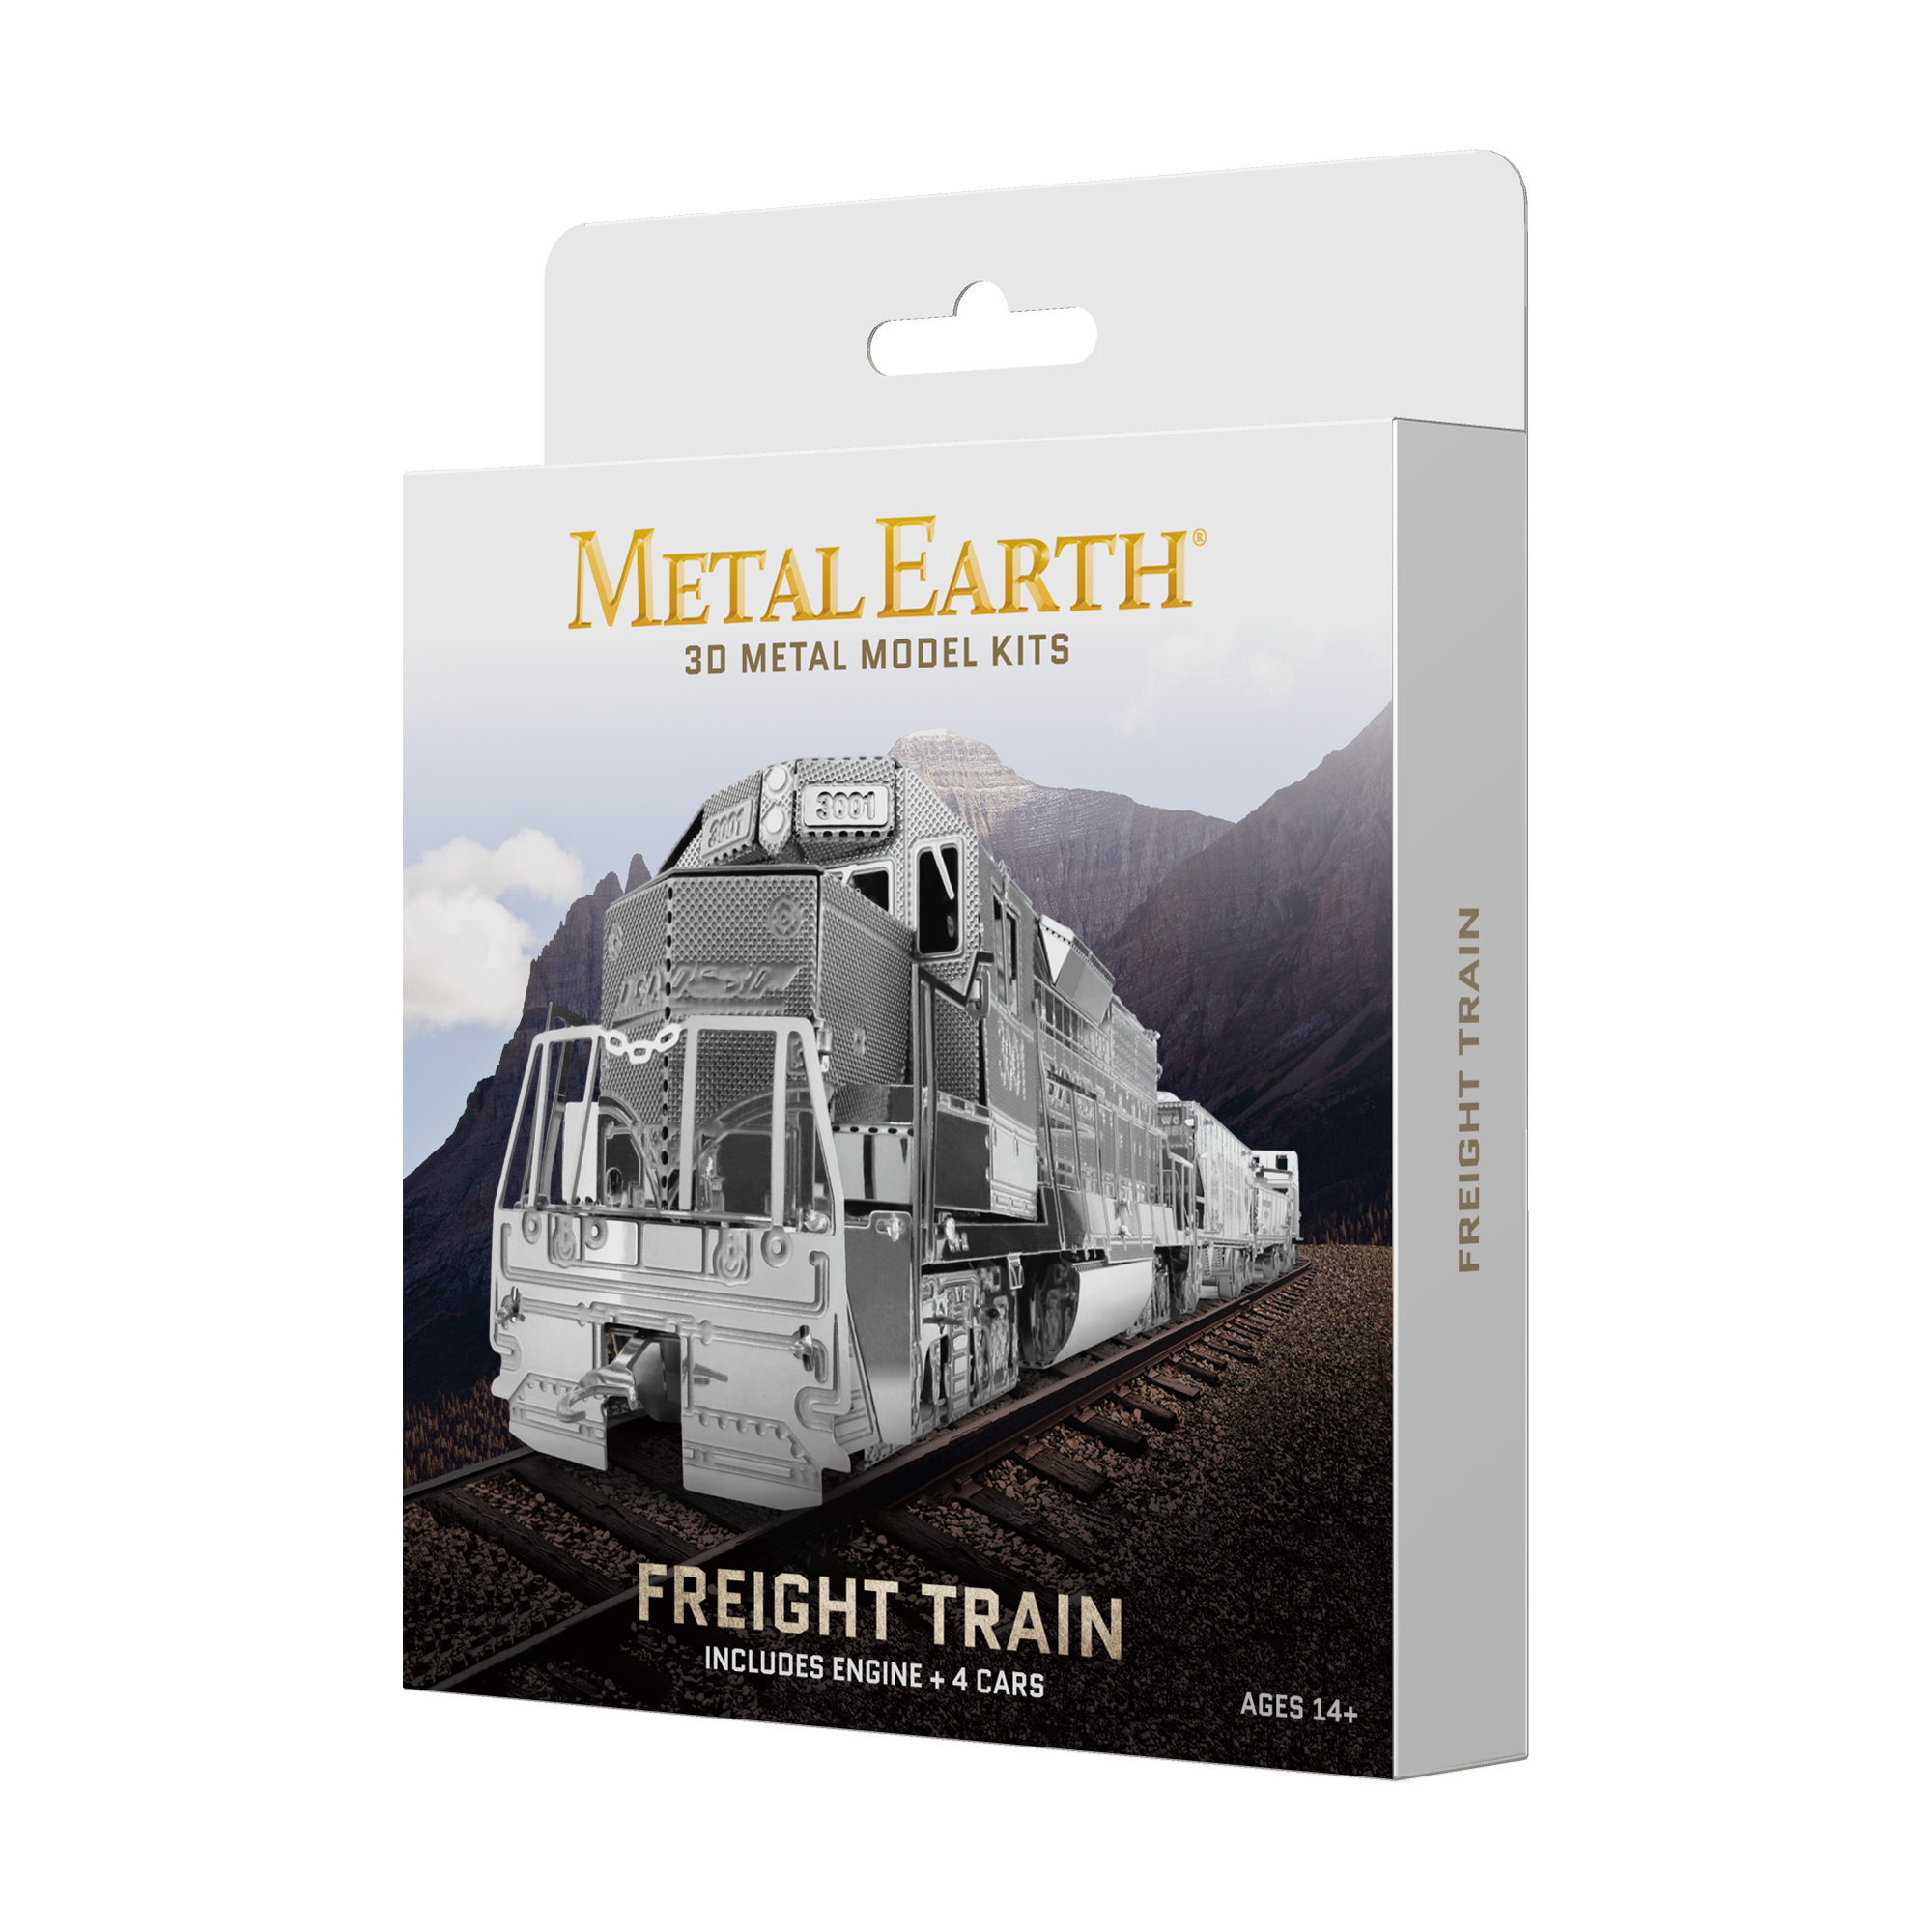 Fascinations Toys & Gifts Metal Earth 3D Metal Model Kit - Freight Train Box Set